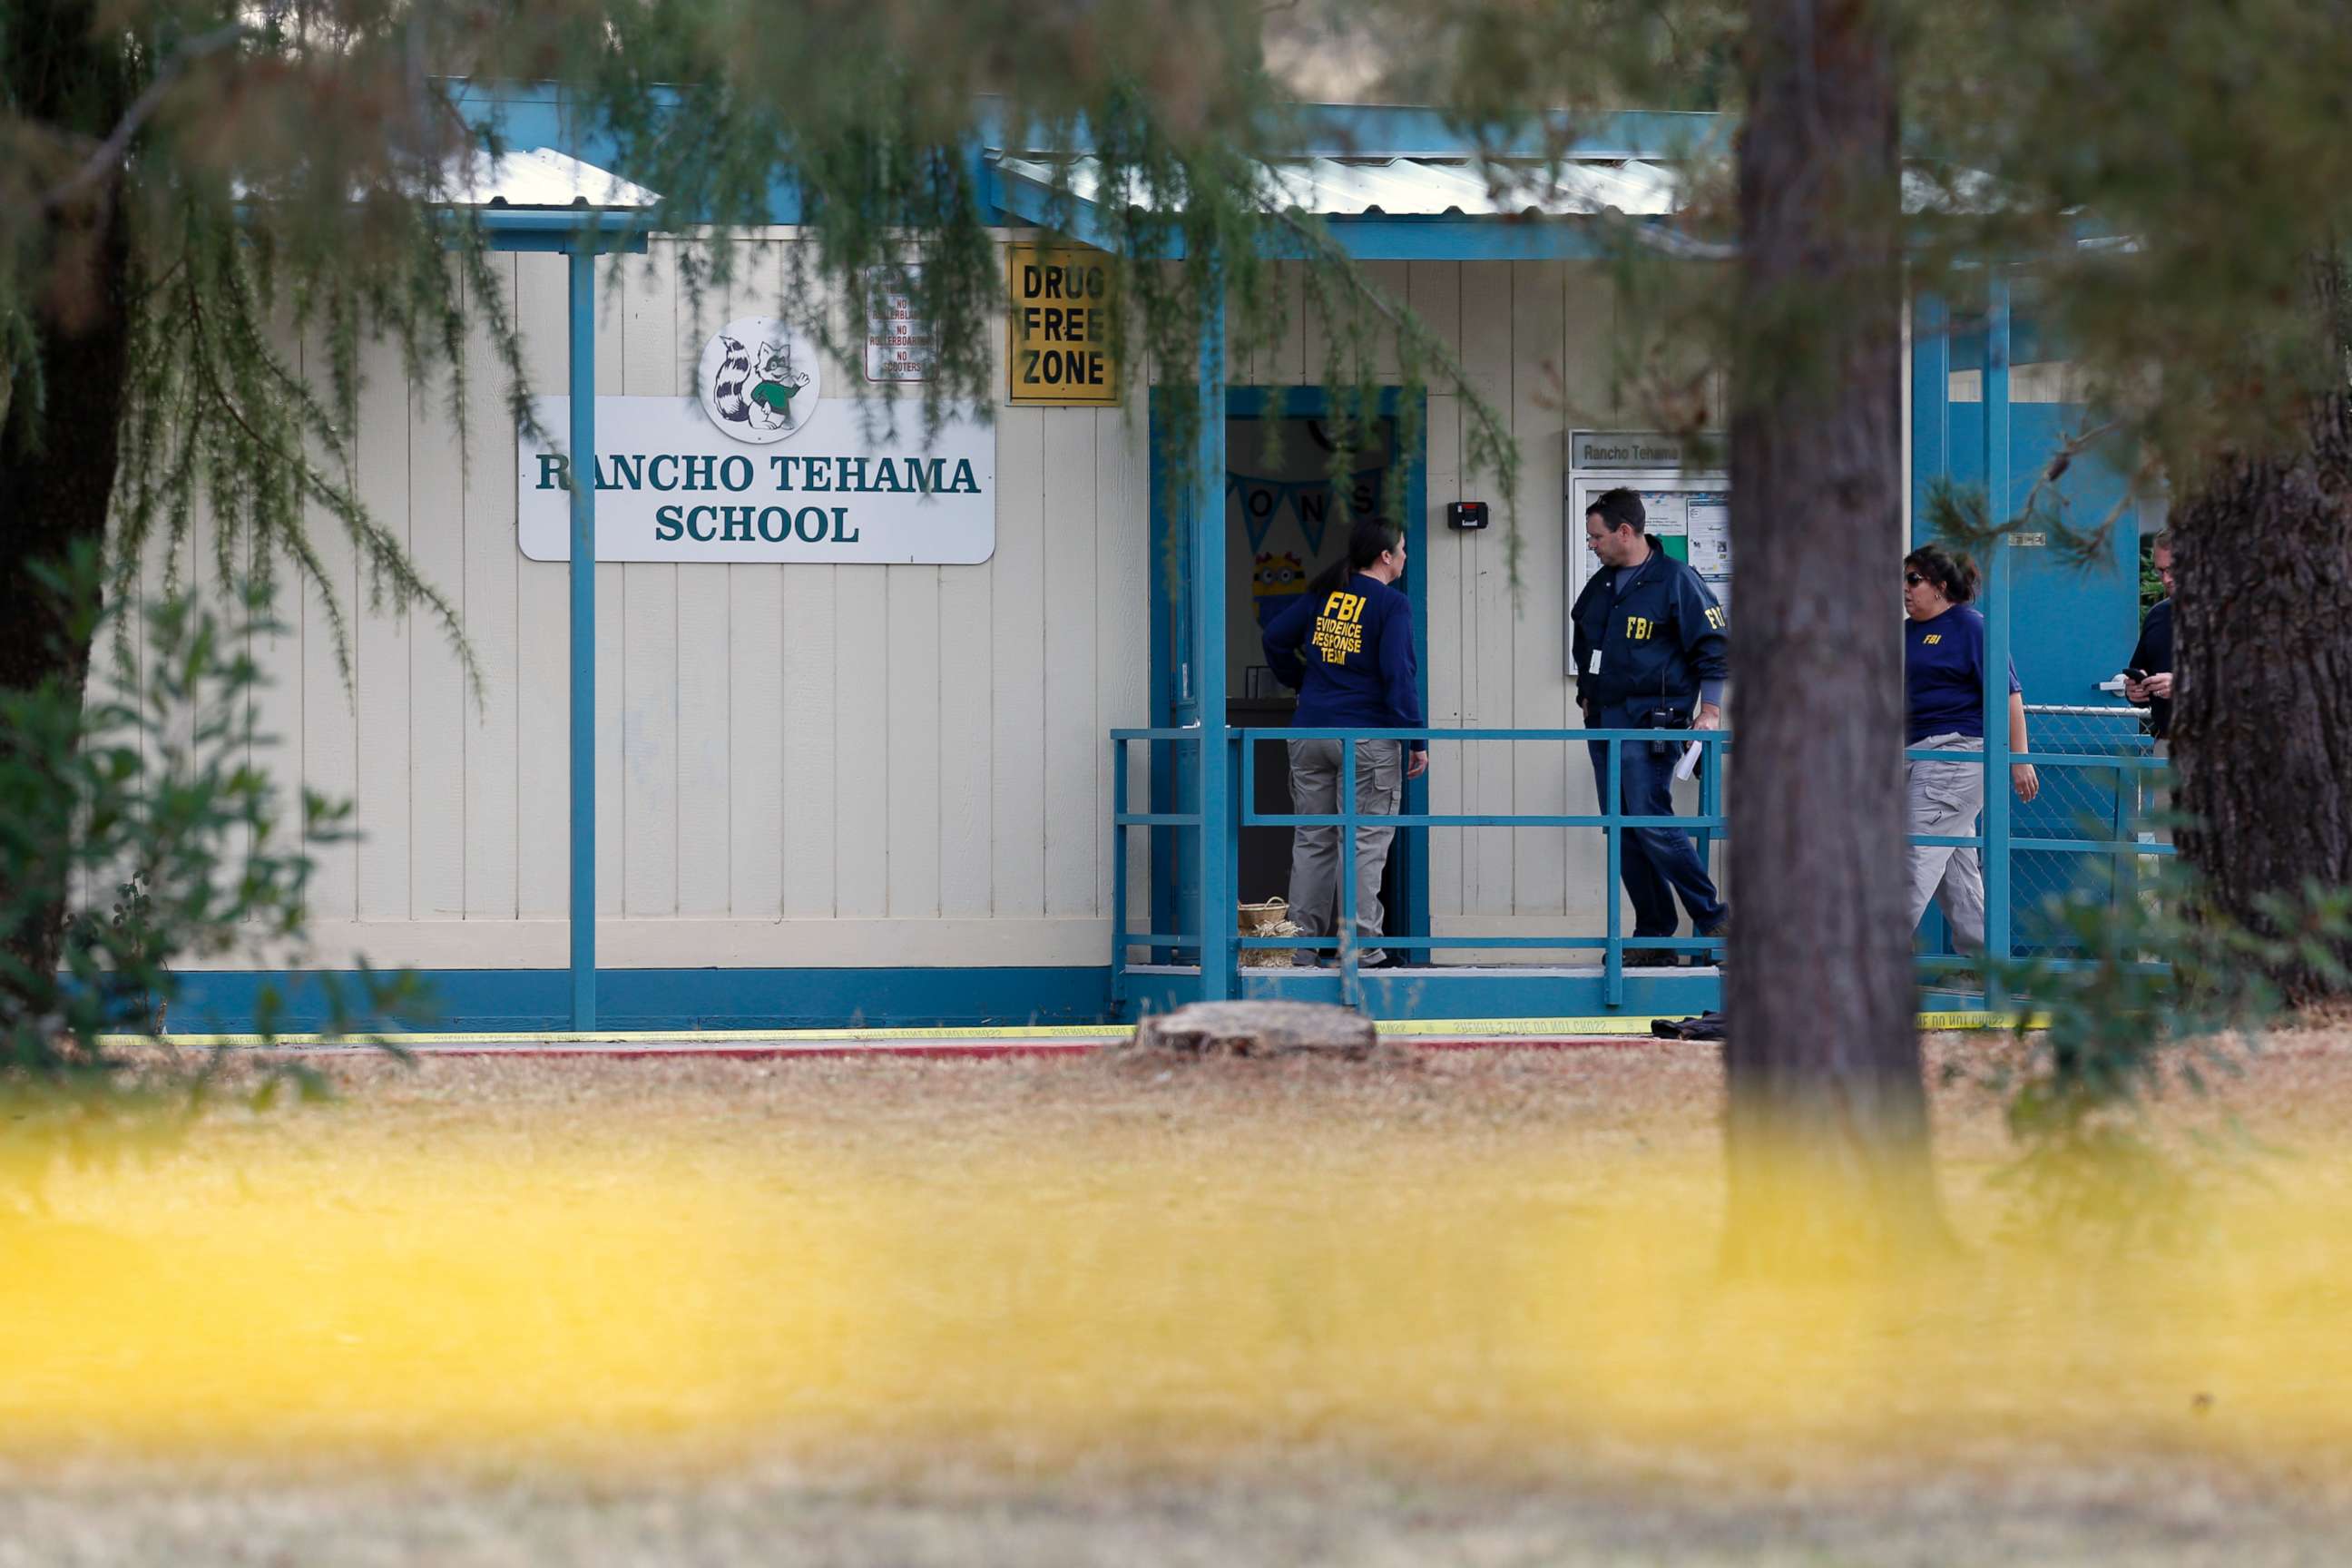 PHOTO: FBI investigators visit Rancho Tehama elementary school in the small community of Rancho Tehama, Calif. where a gunman killed at least four people in a violent rampage that began at a home and ultimately included seven locations, Nov. 14, 2017.